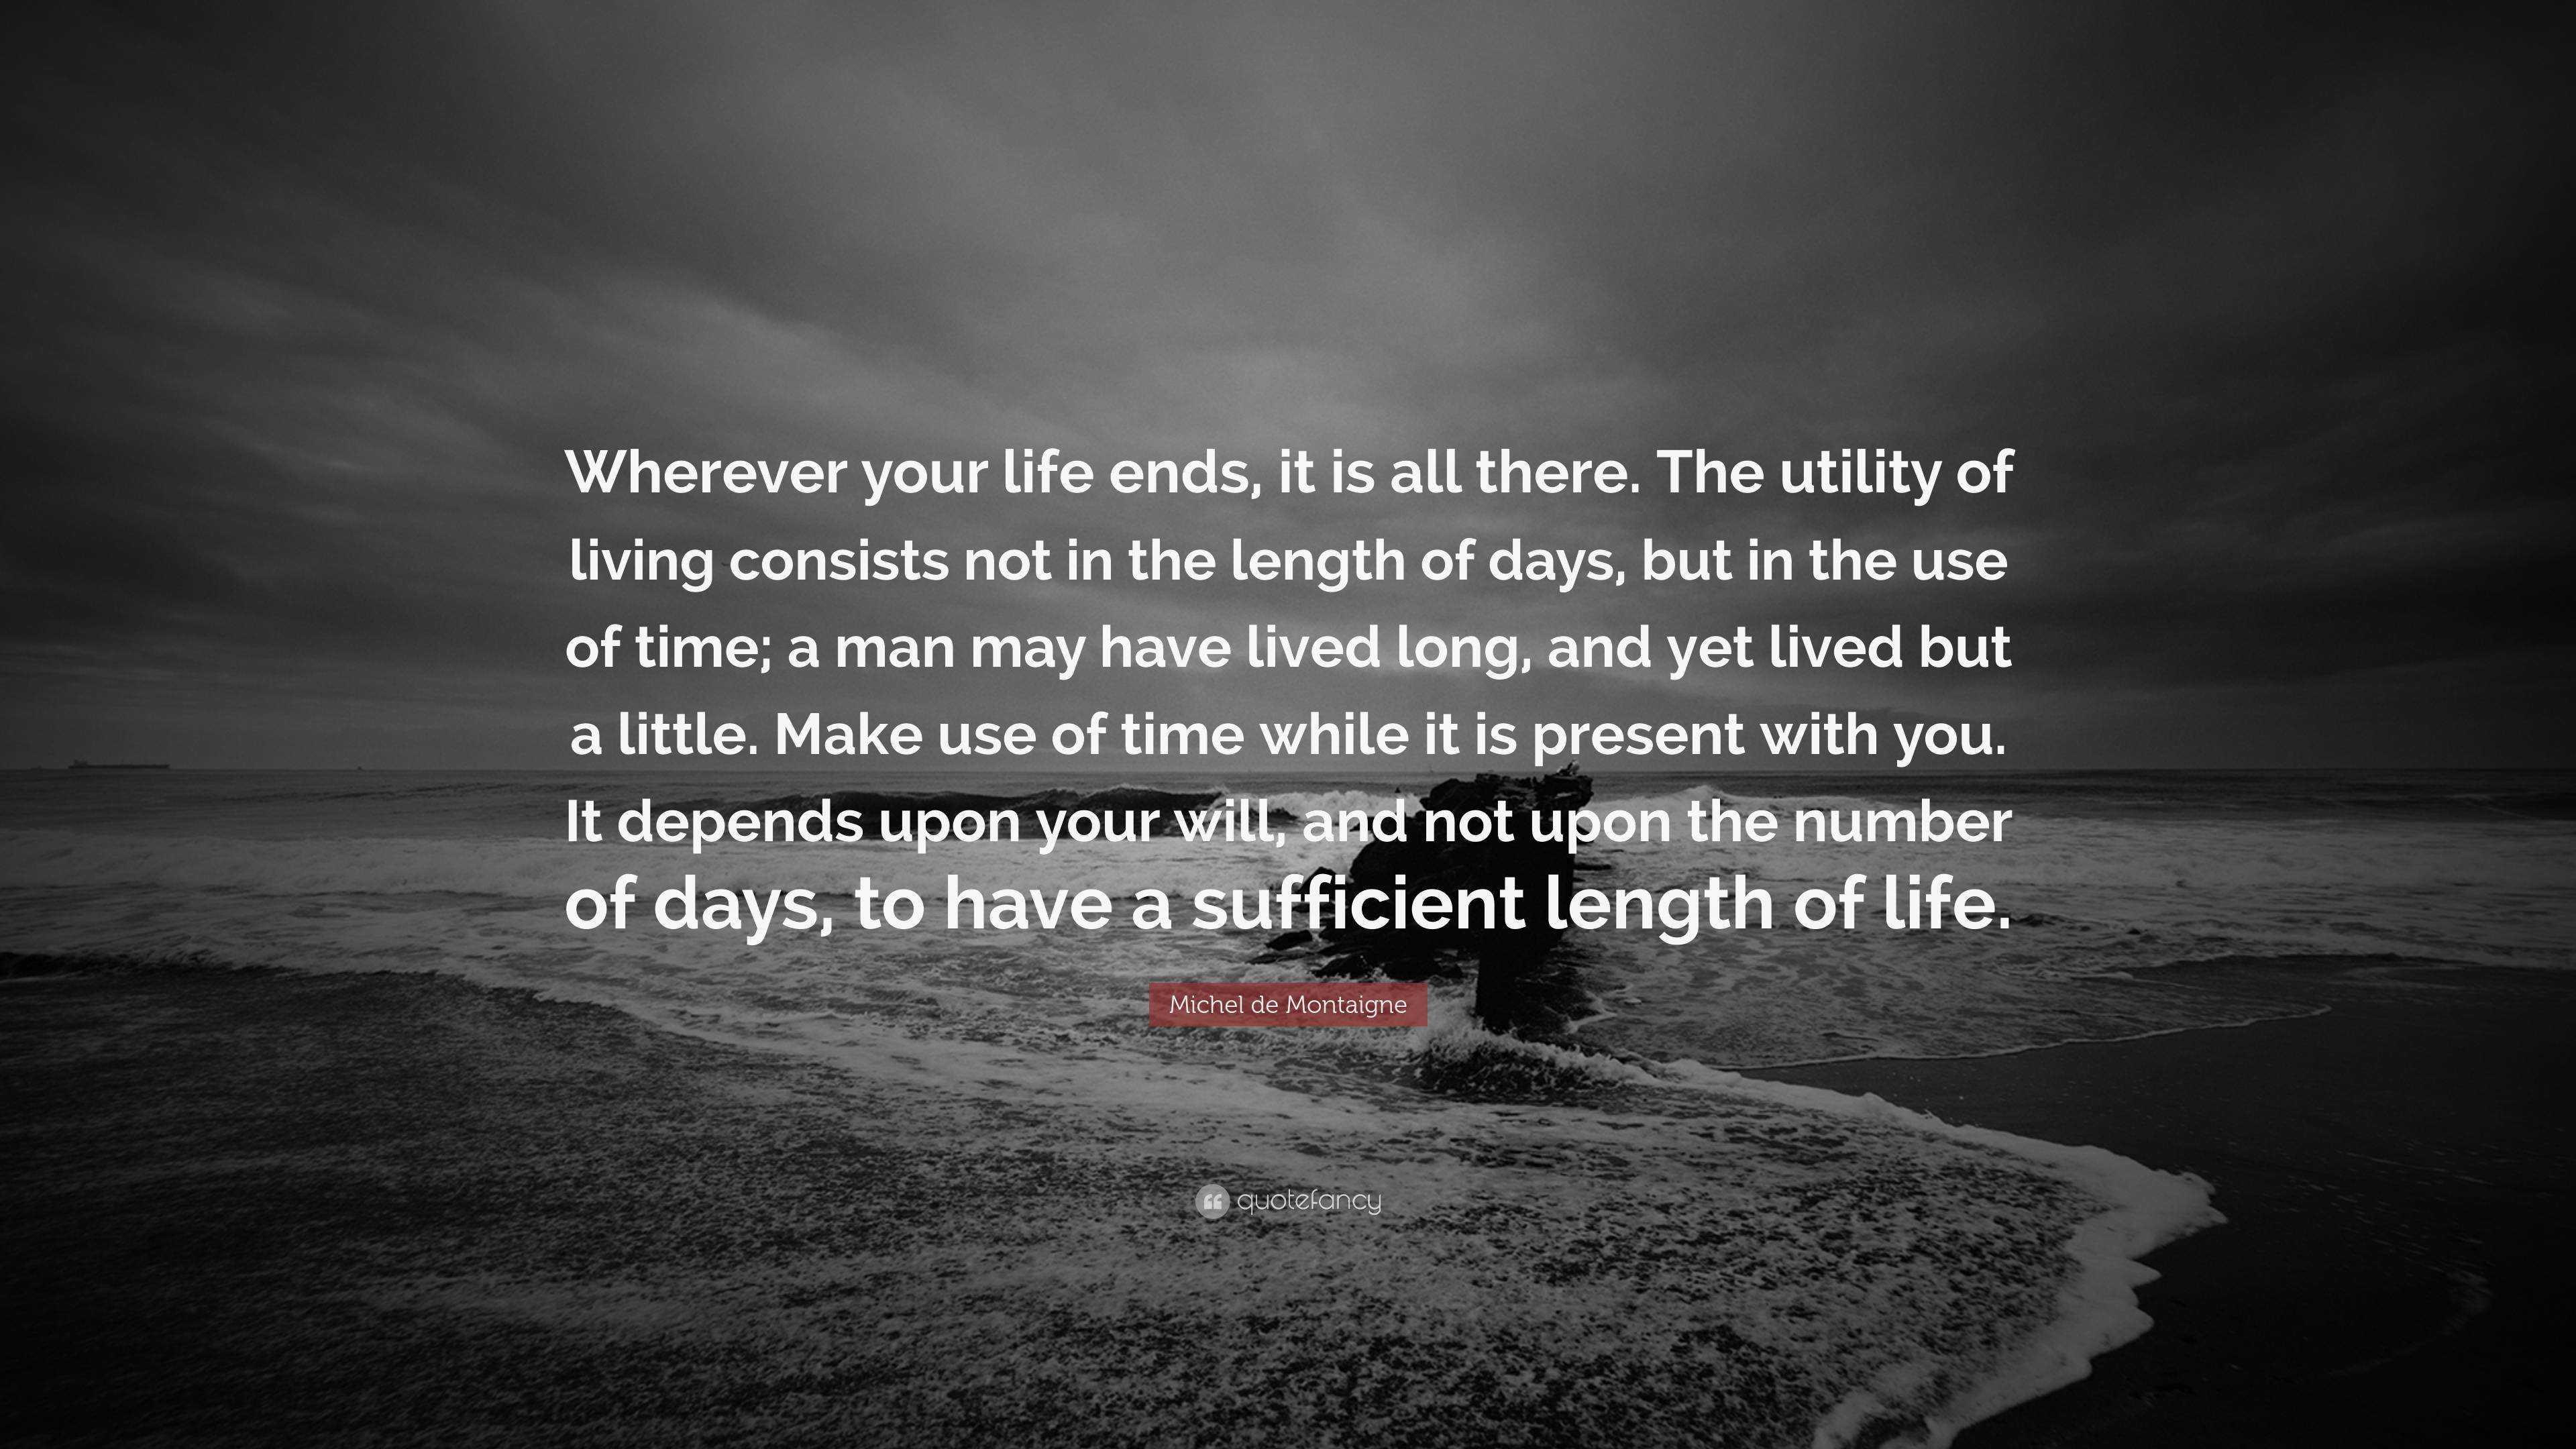 Michel de Montaigne Quote: “Wherever your life ends, it is all there ...